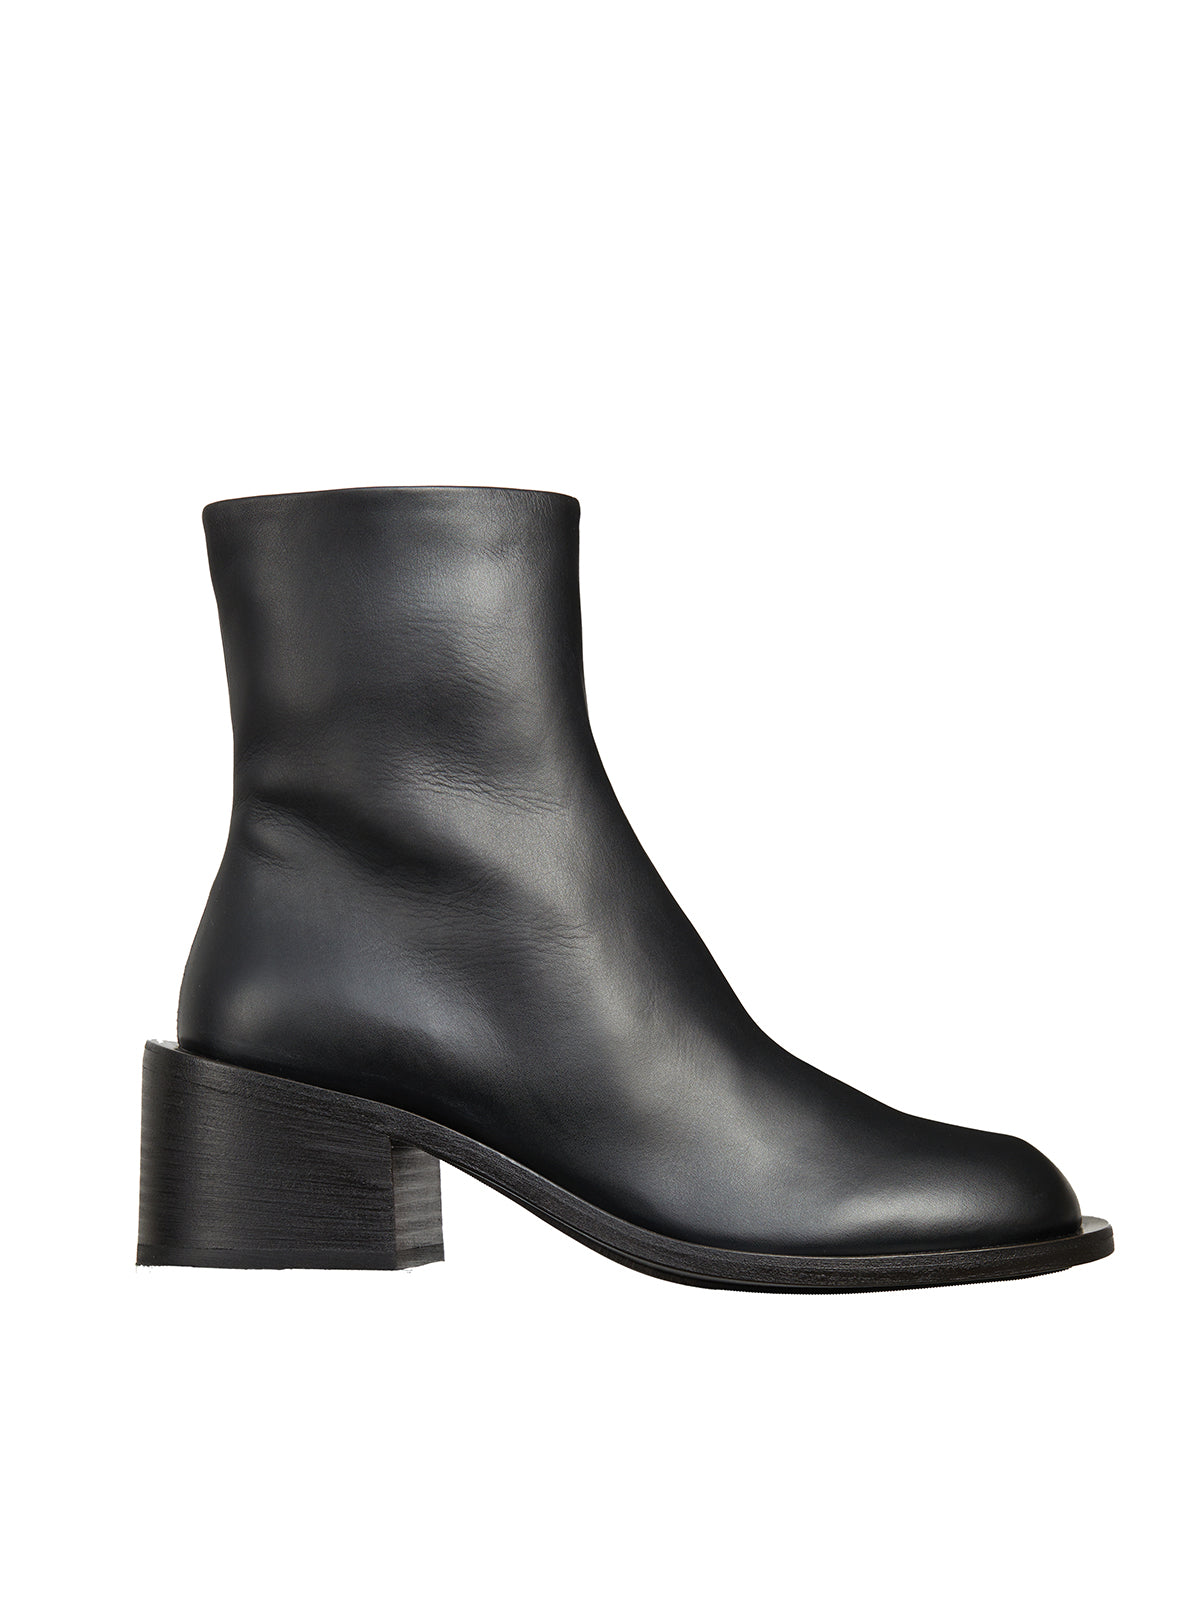 MARSELL Sleek and Stylish Black Leather Boots for Women